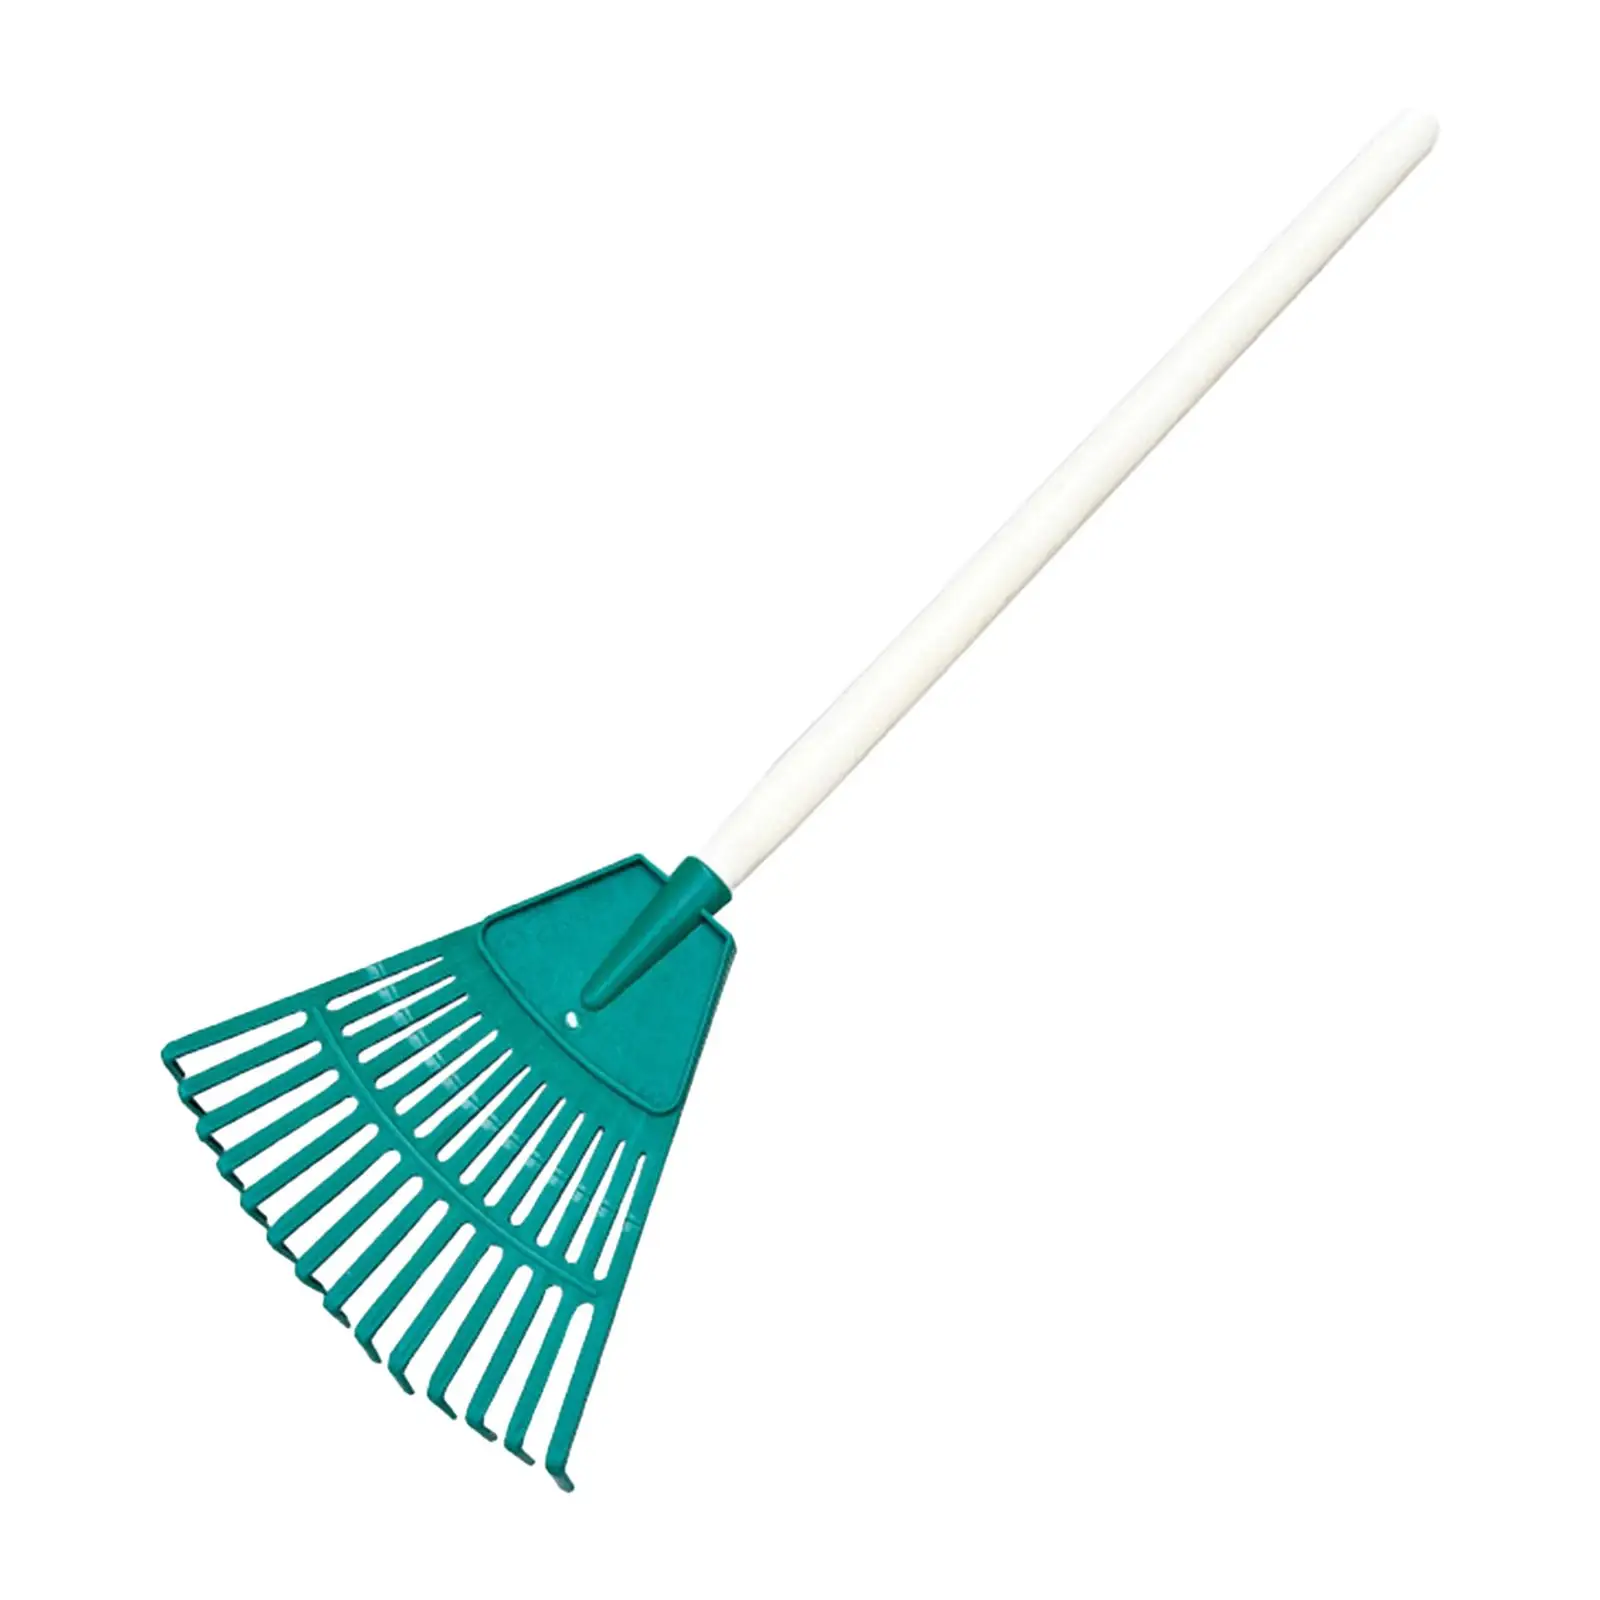 Leaf Rake Detachable Mini Easy on and Off Storage Garden Rakes for Lawns Loosening Soil Grass Grooming Clean up of Plants Yard